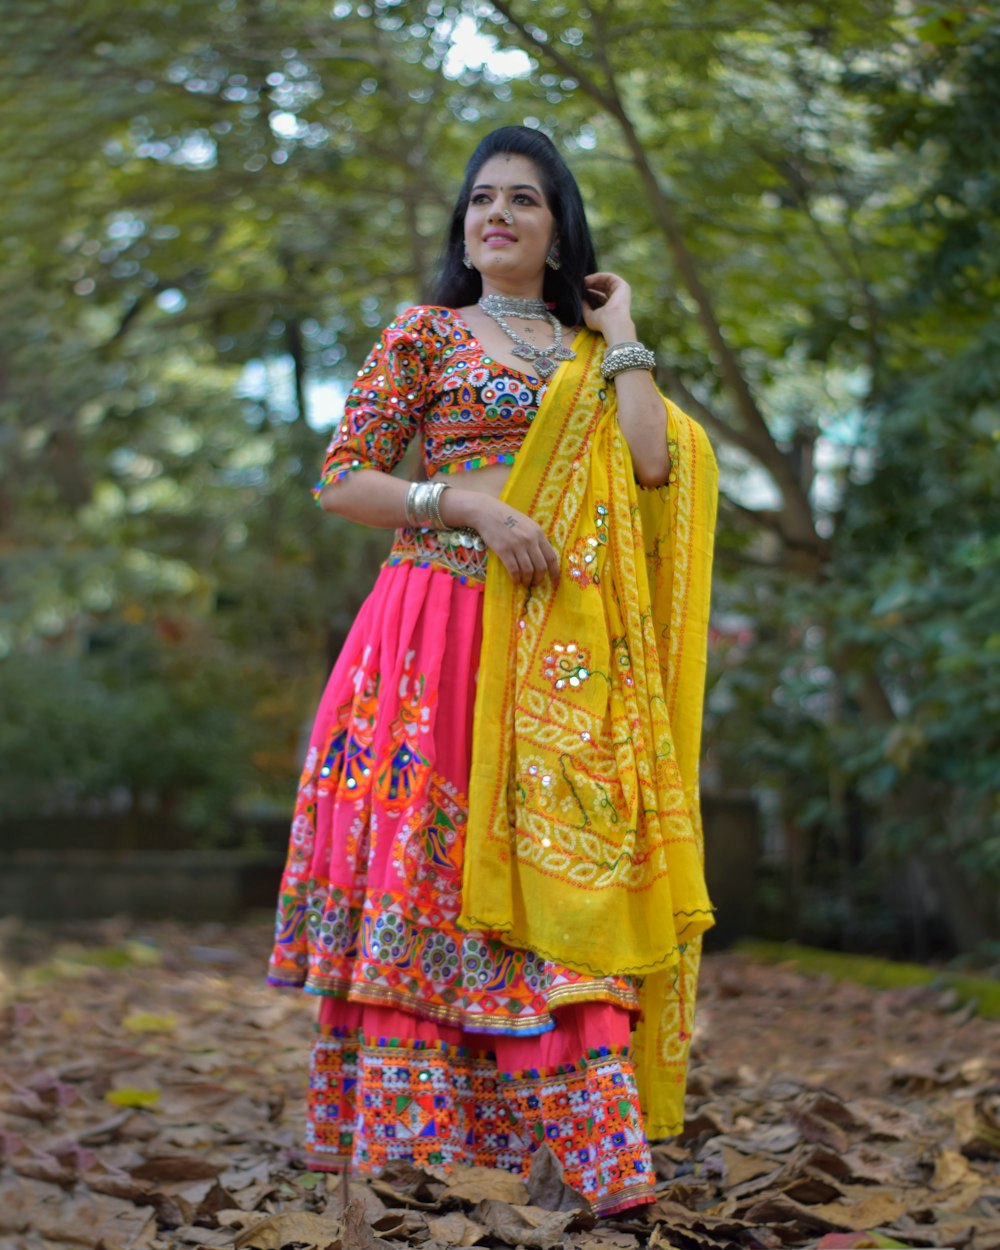 a woman in a colorful dress standing in leaves